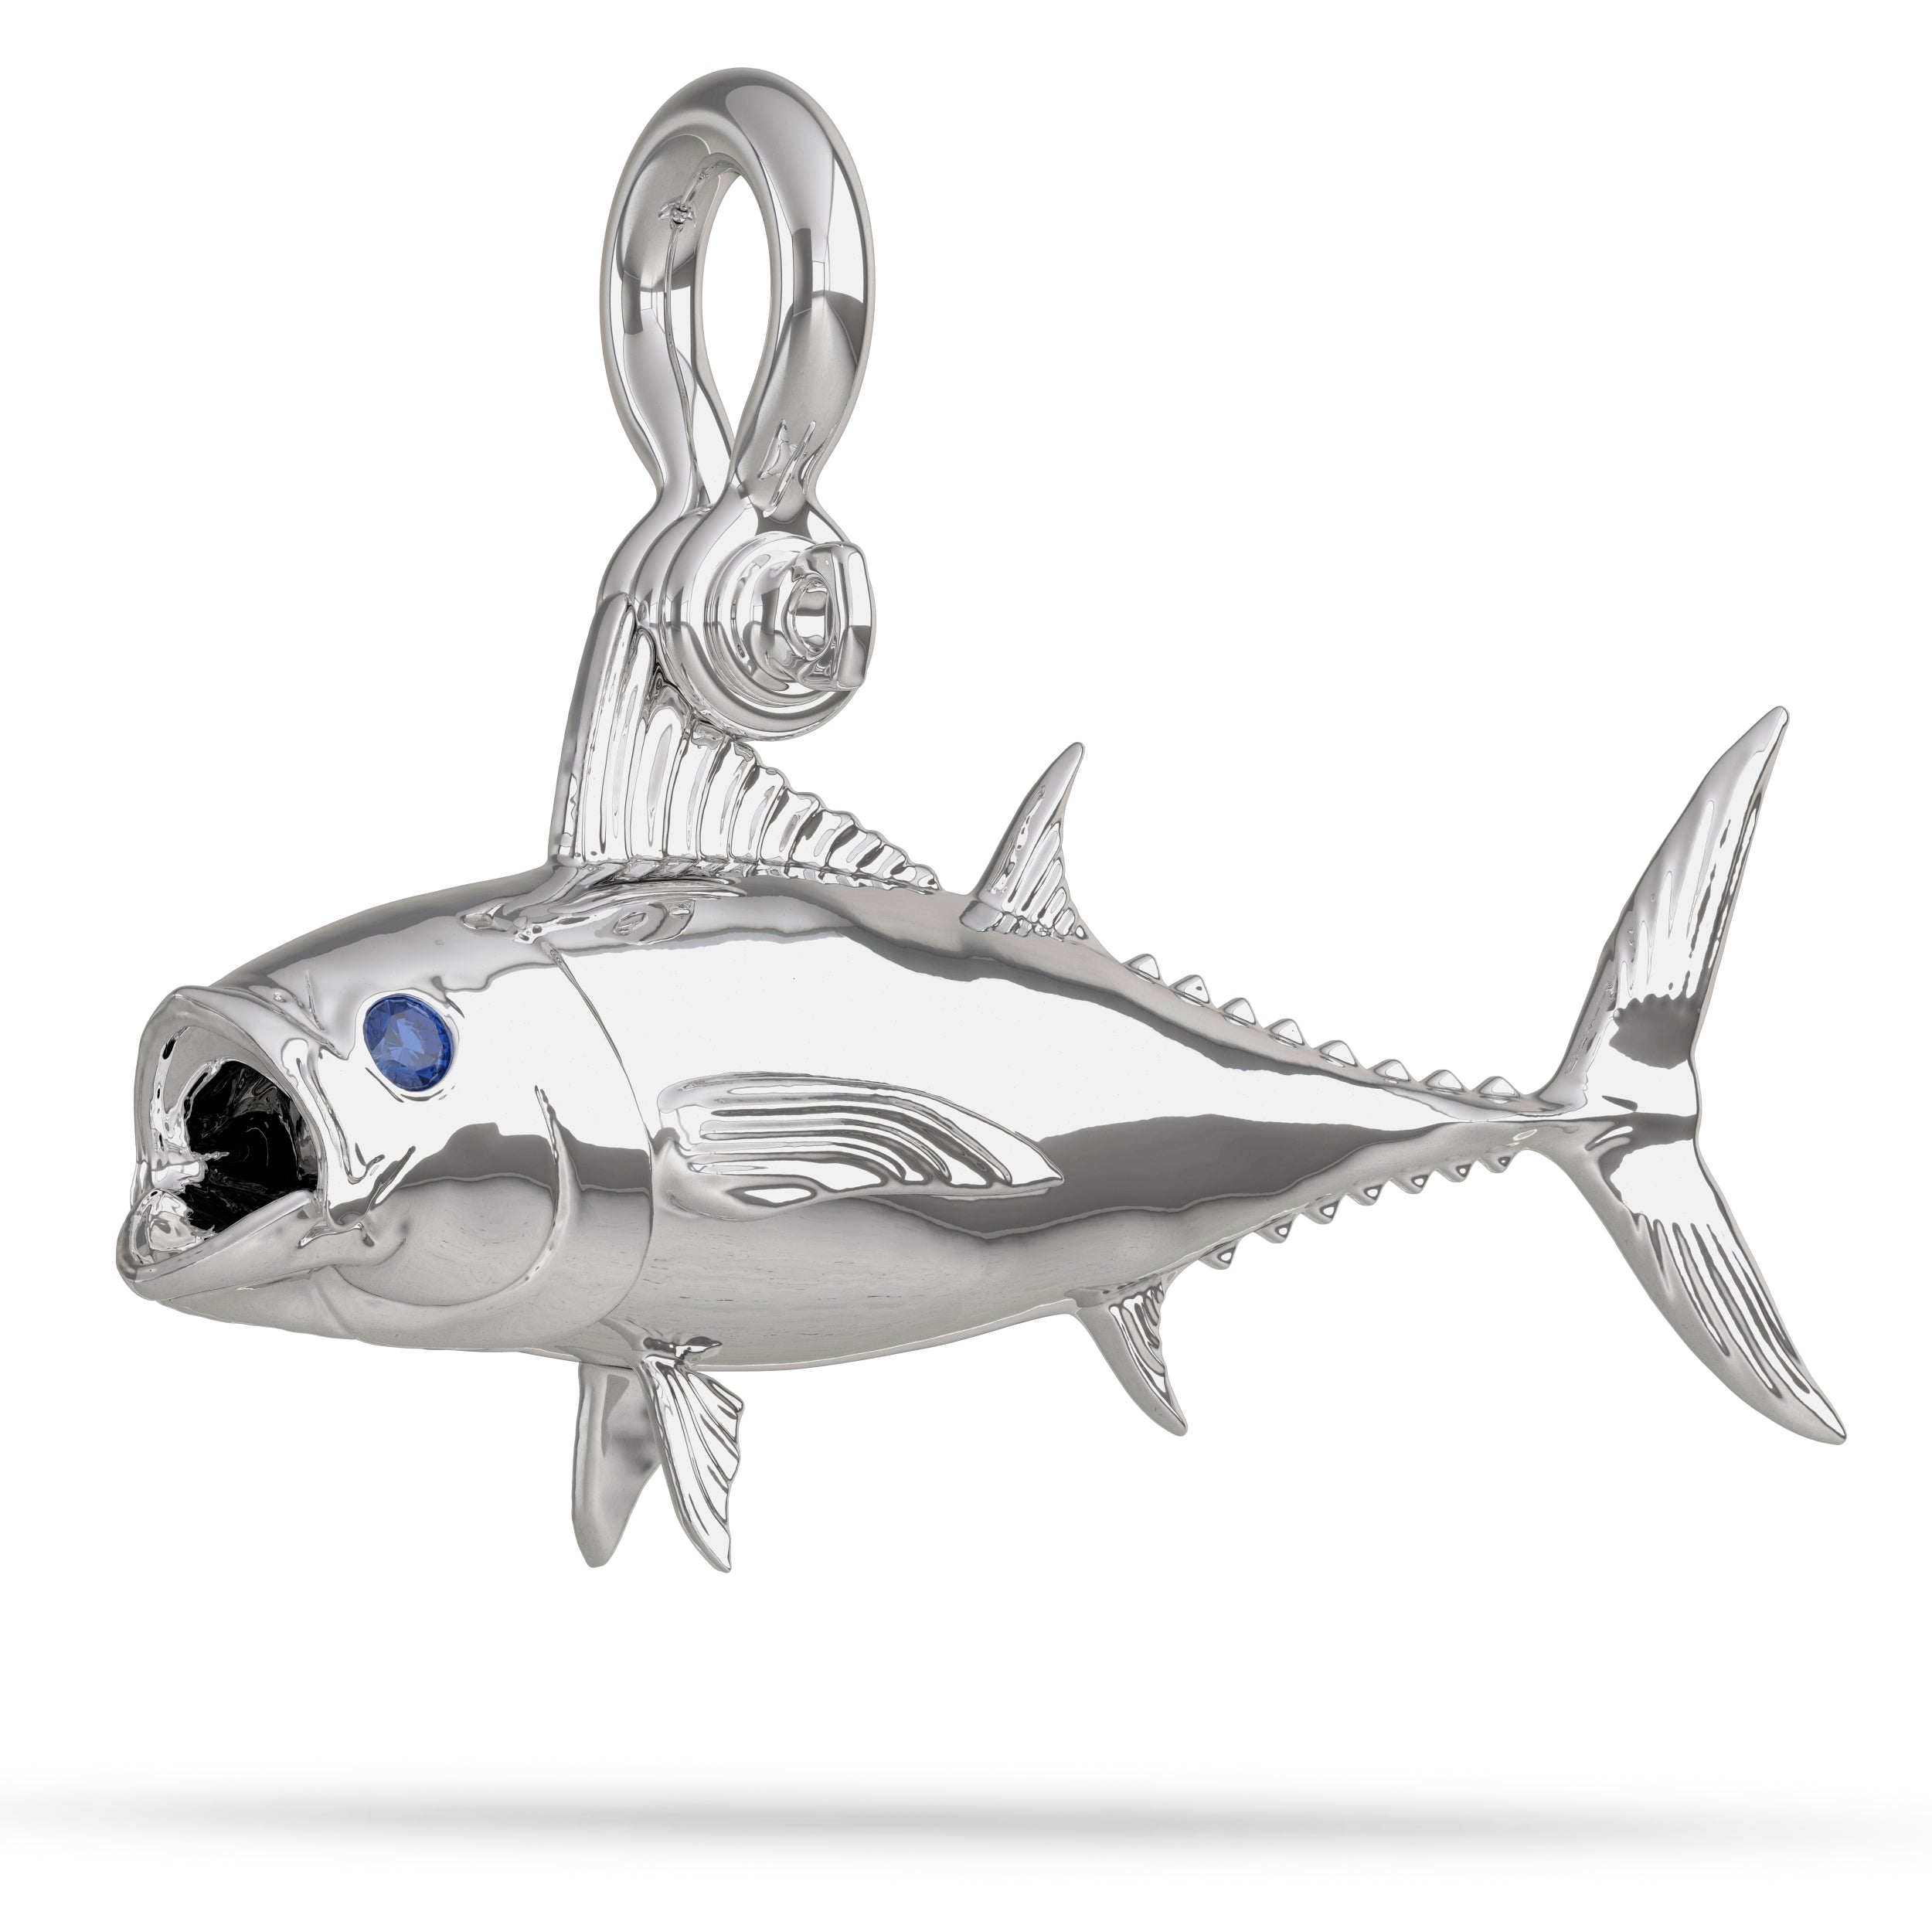 Sterling Silver Blackfin Tuna Pendant High Polished Mirror Finish With Blue Sapphire Eye with A Mariner Shackle Bail Custom Designed By Nautical Treasure Jewelry In The Florida Keys Caught on Bubbler C & H Lures